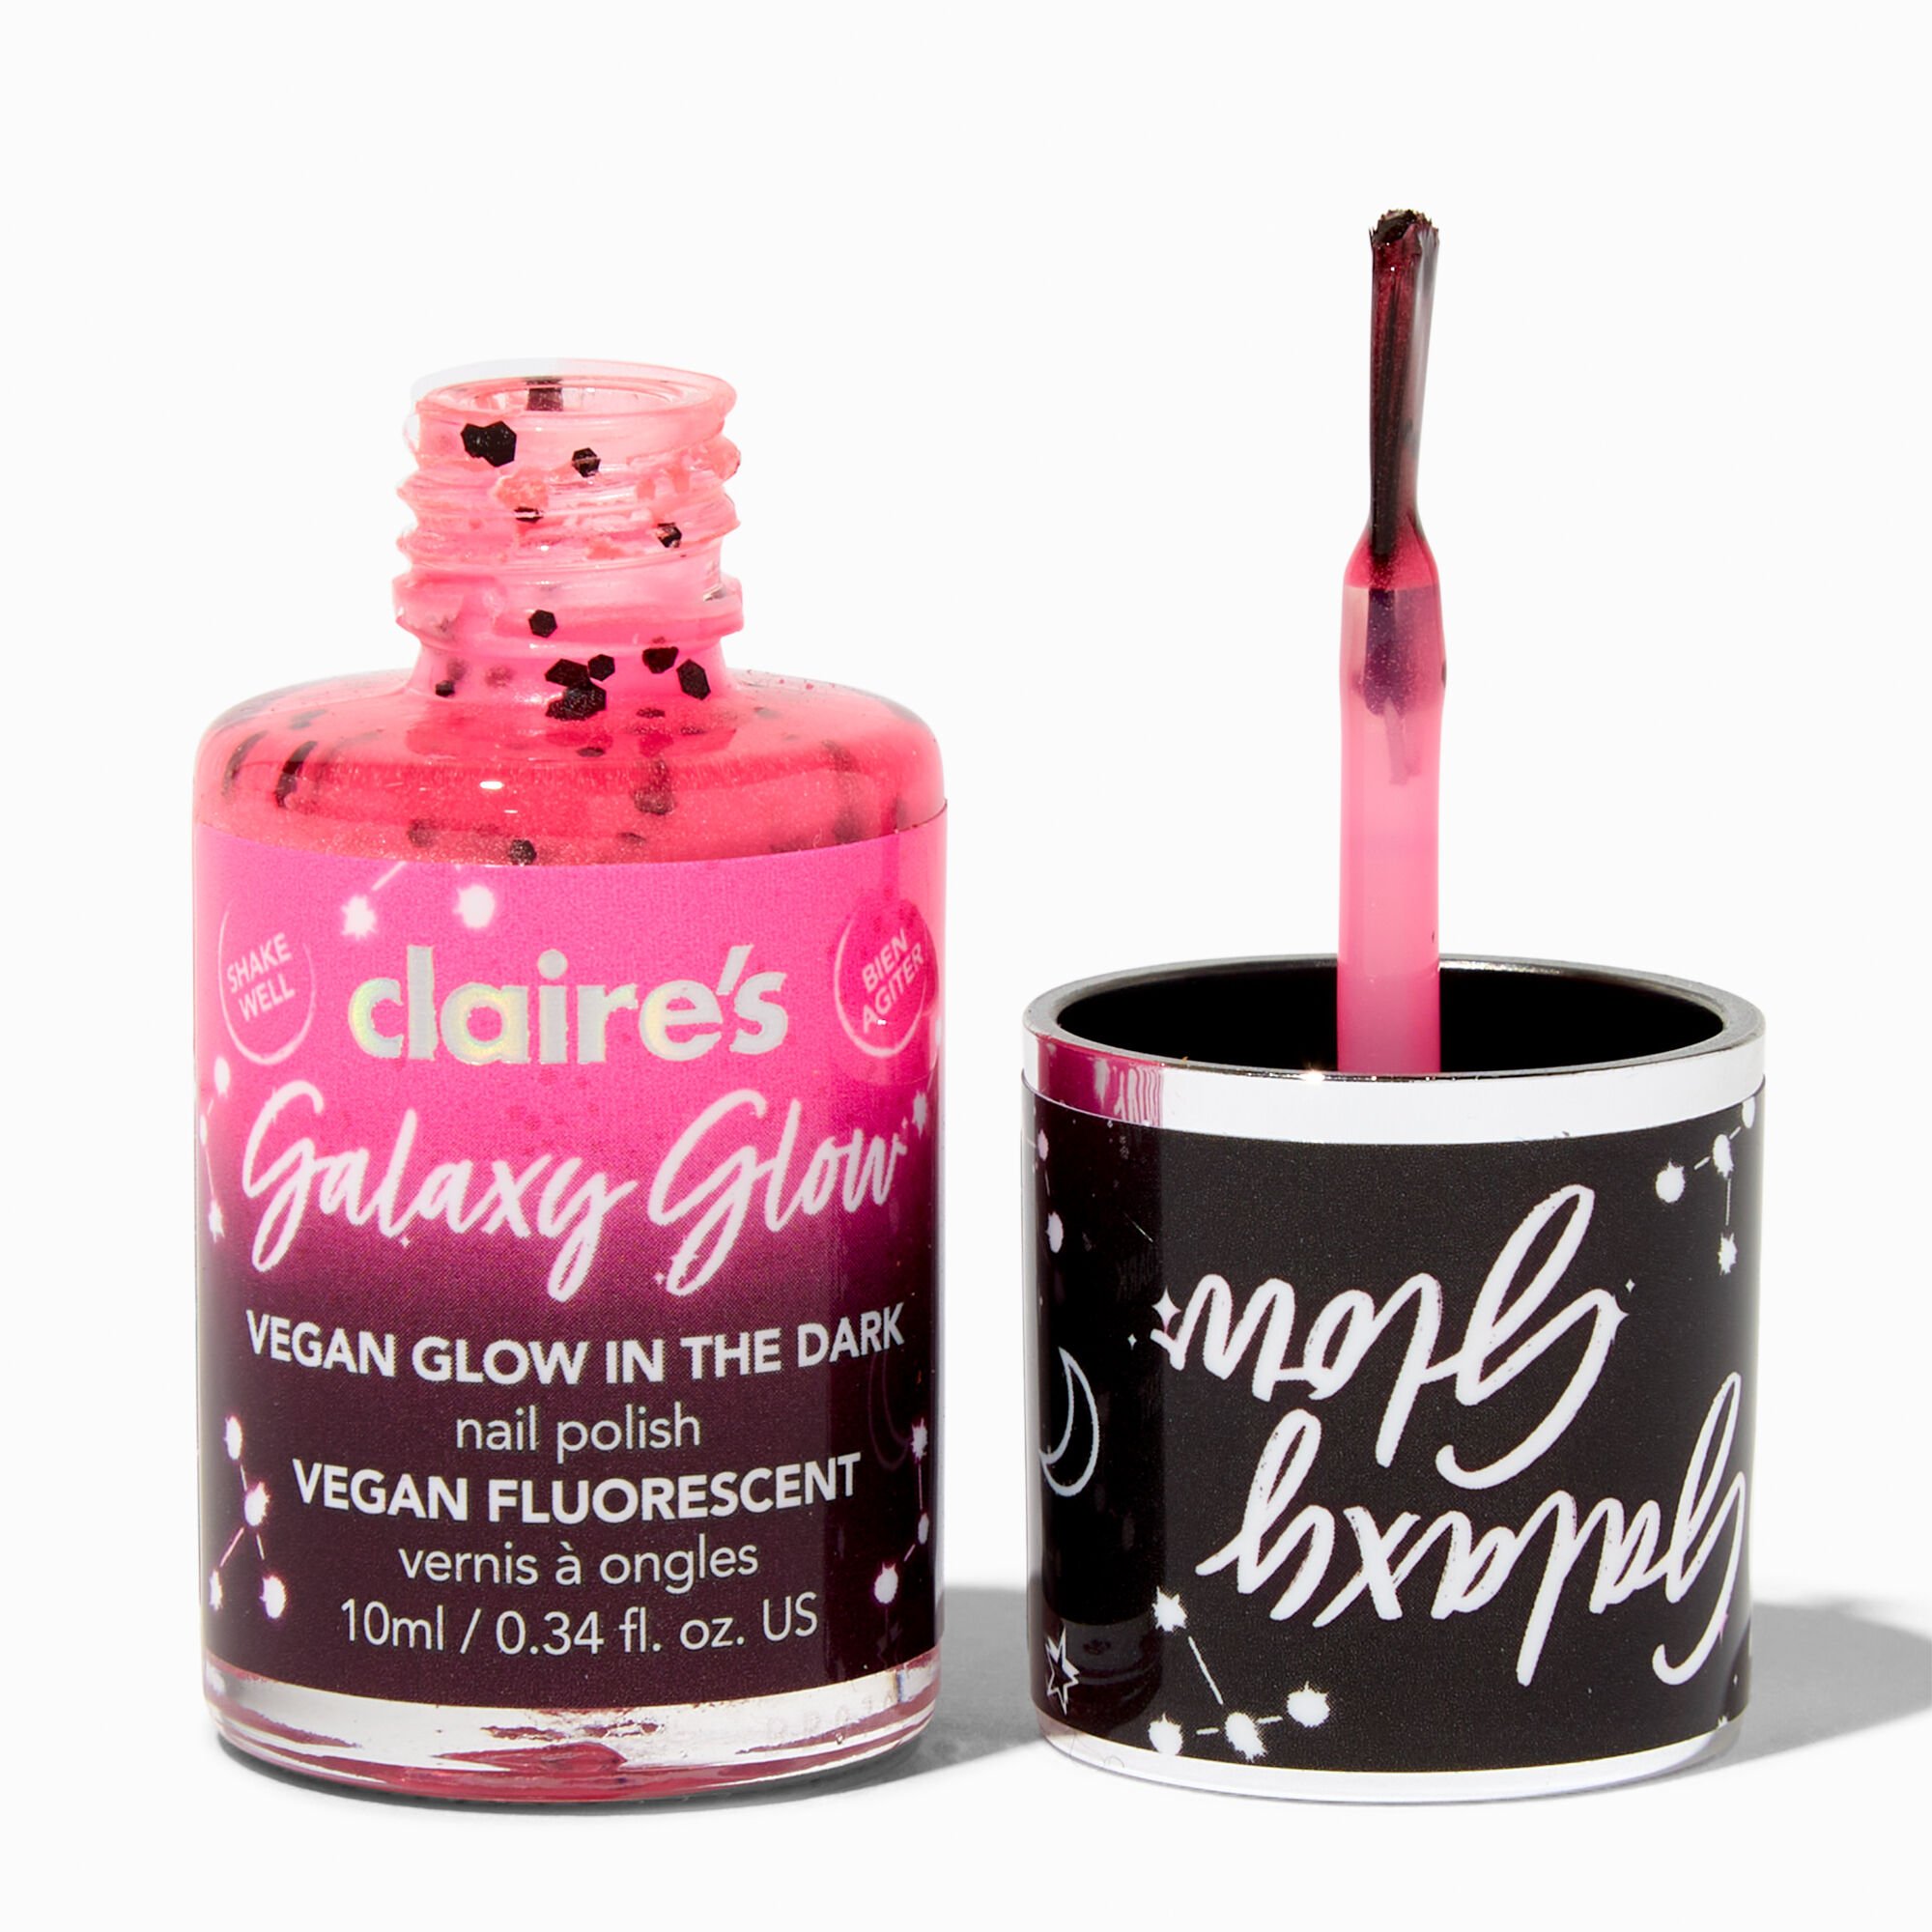 View Claires Galaxy Glow Vegan In The Dark Nail Polish Strawberry Moon information